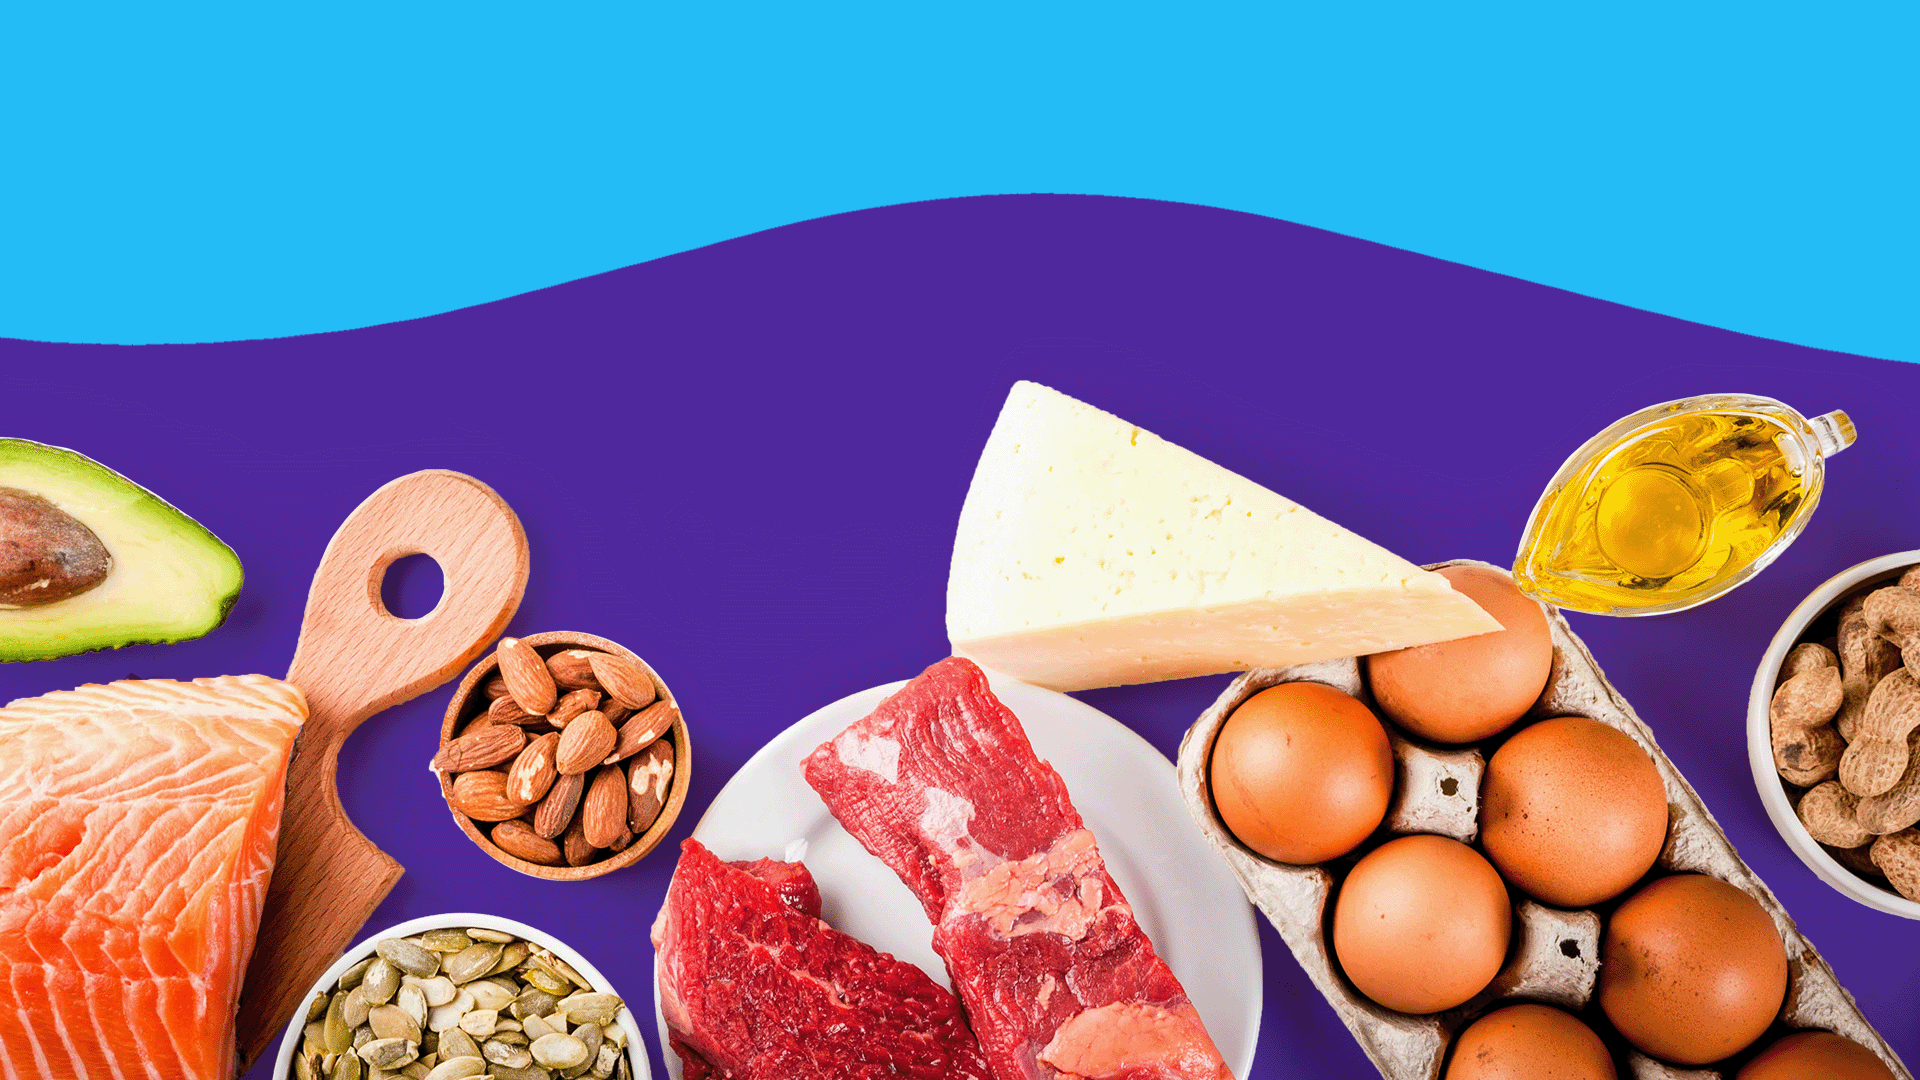 Does keto work for everyone?